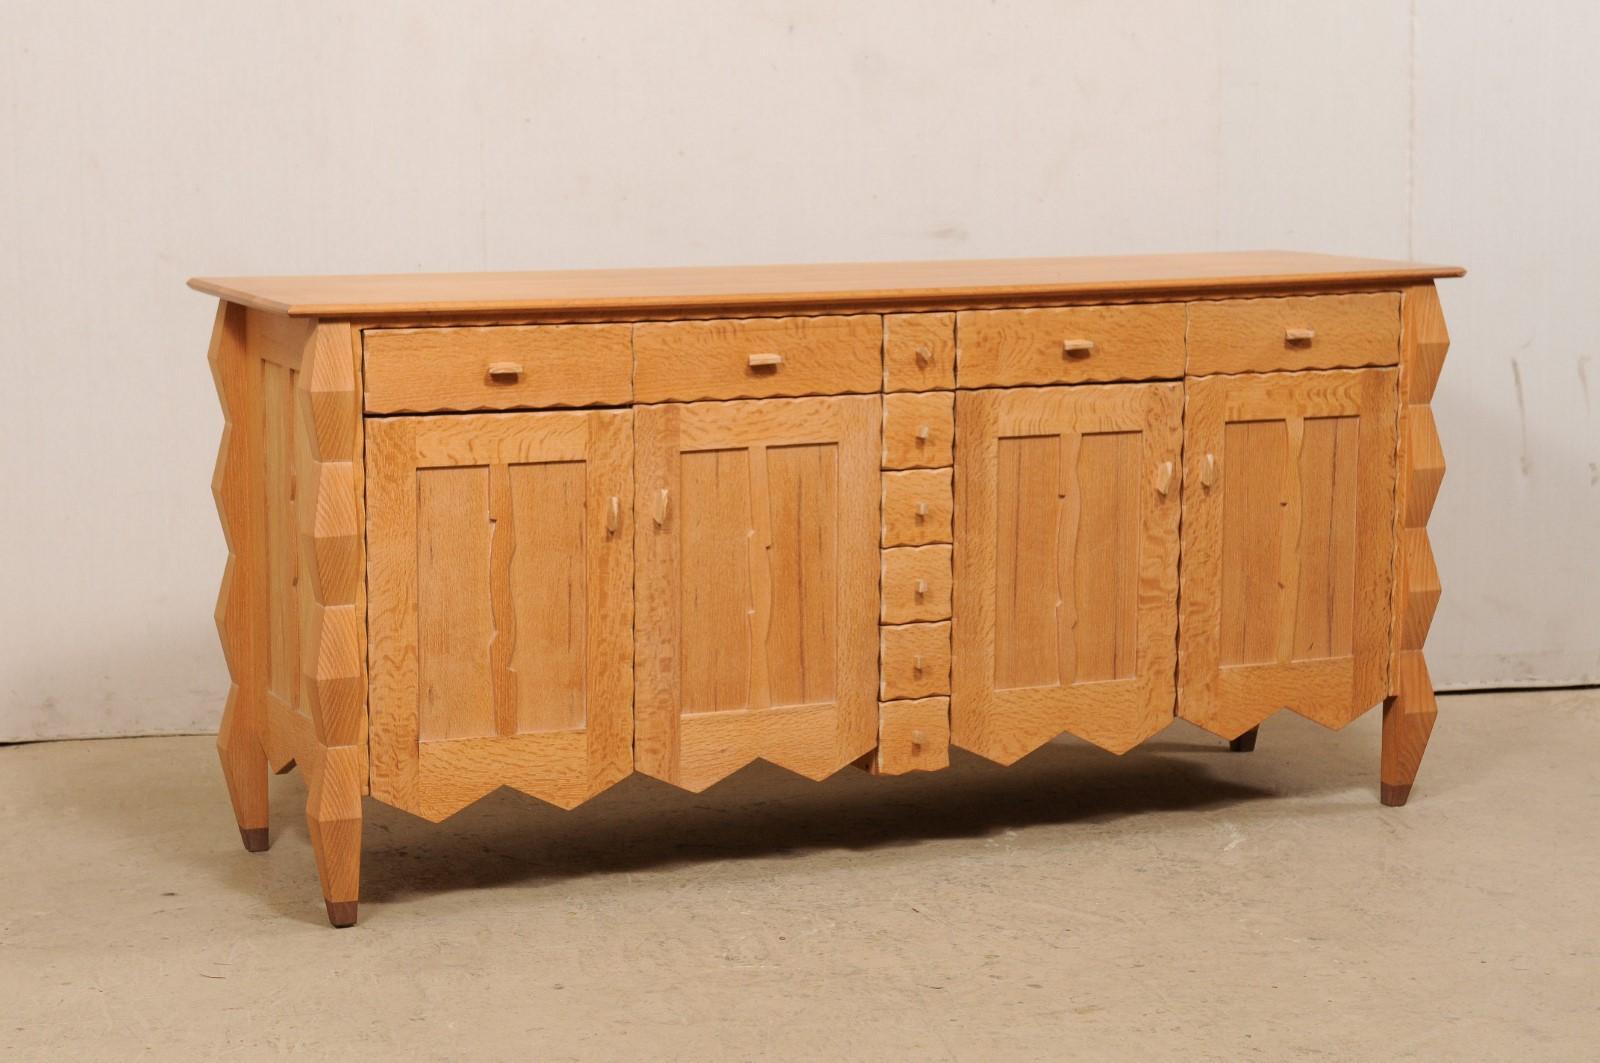 This artisan created, one-of-a-kind credenza cabinet from New England, offers an abundance of storage, in a whimsical and artistic fashion. It bears the artist/woodworker's signature, 